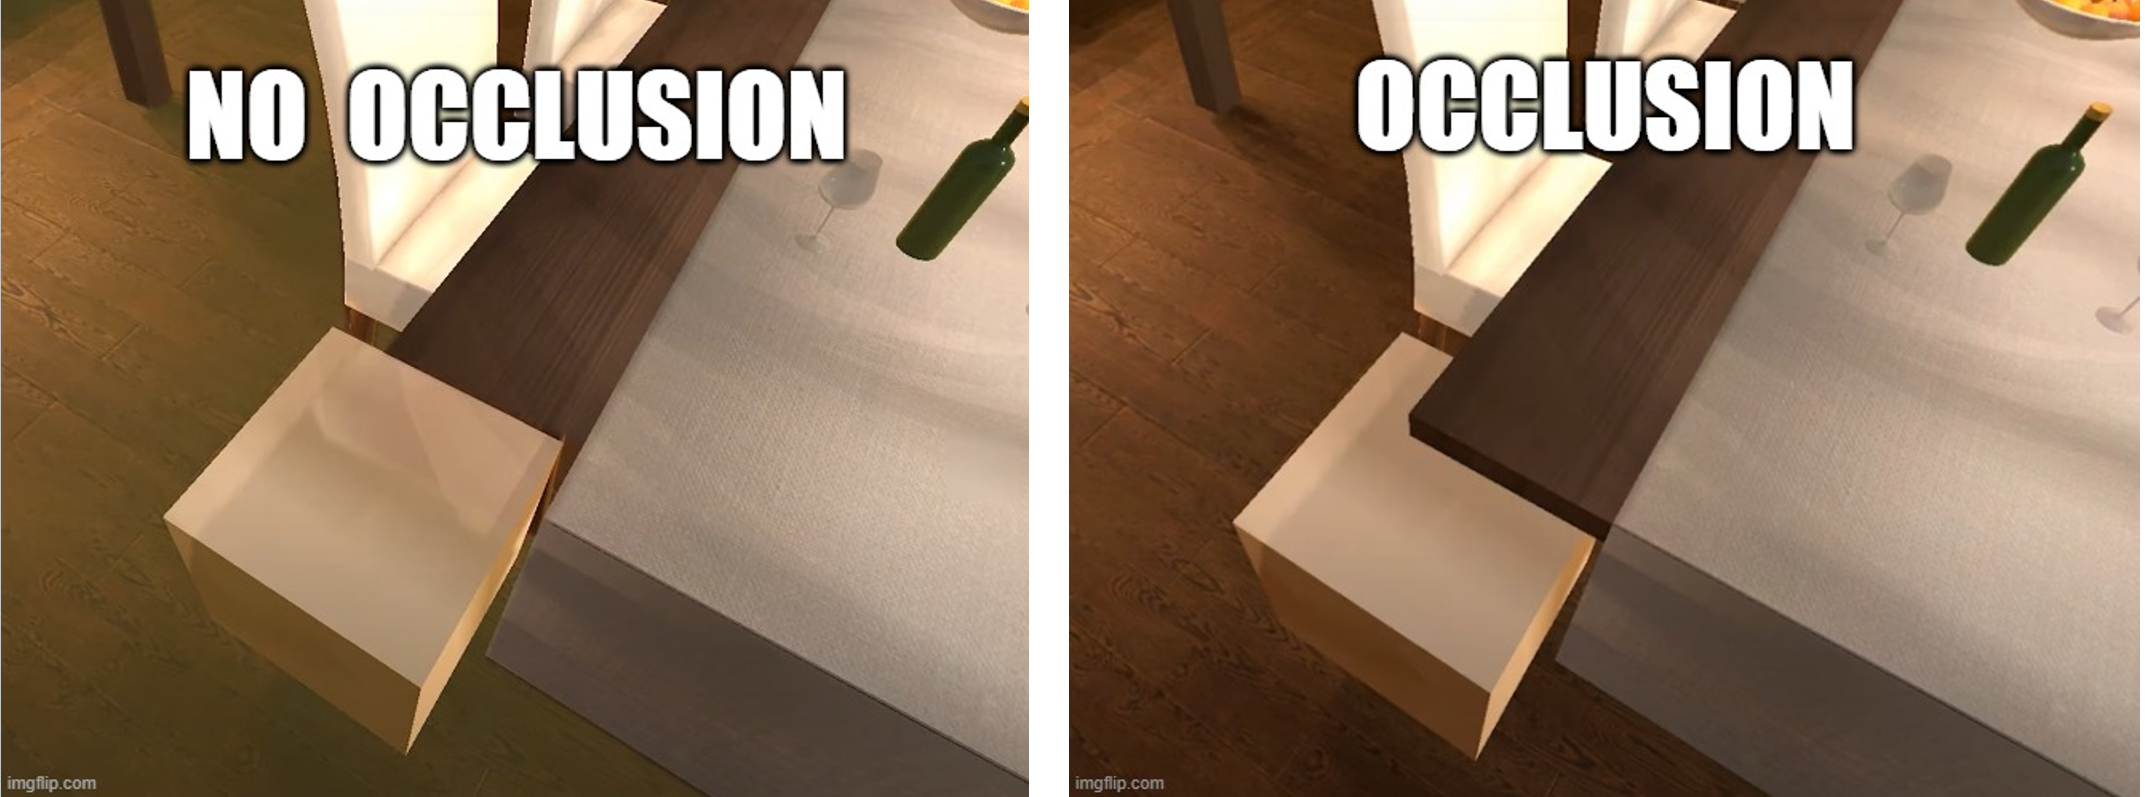 A meme showing occlusion vs. no occlusion